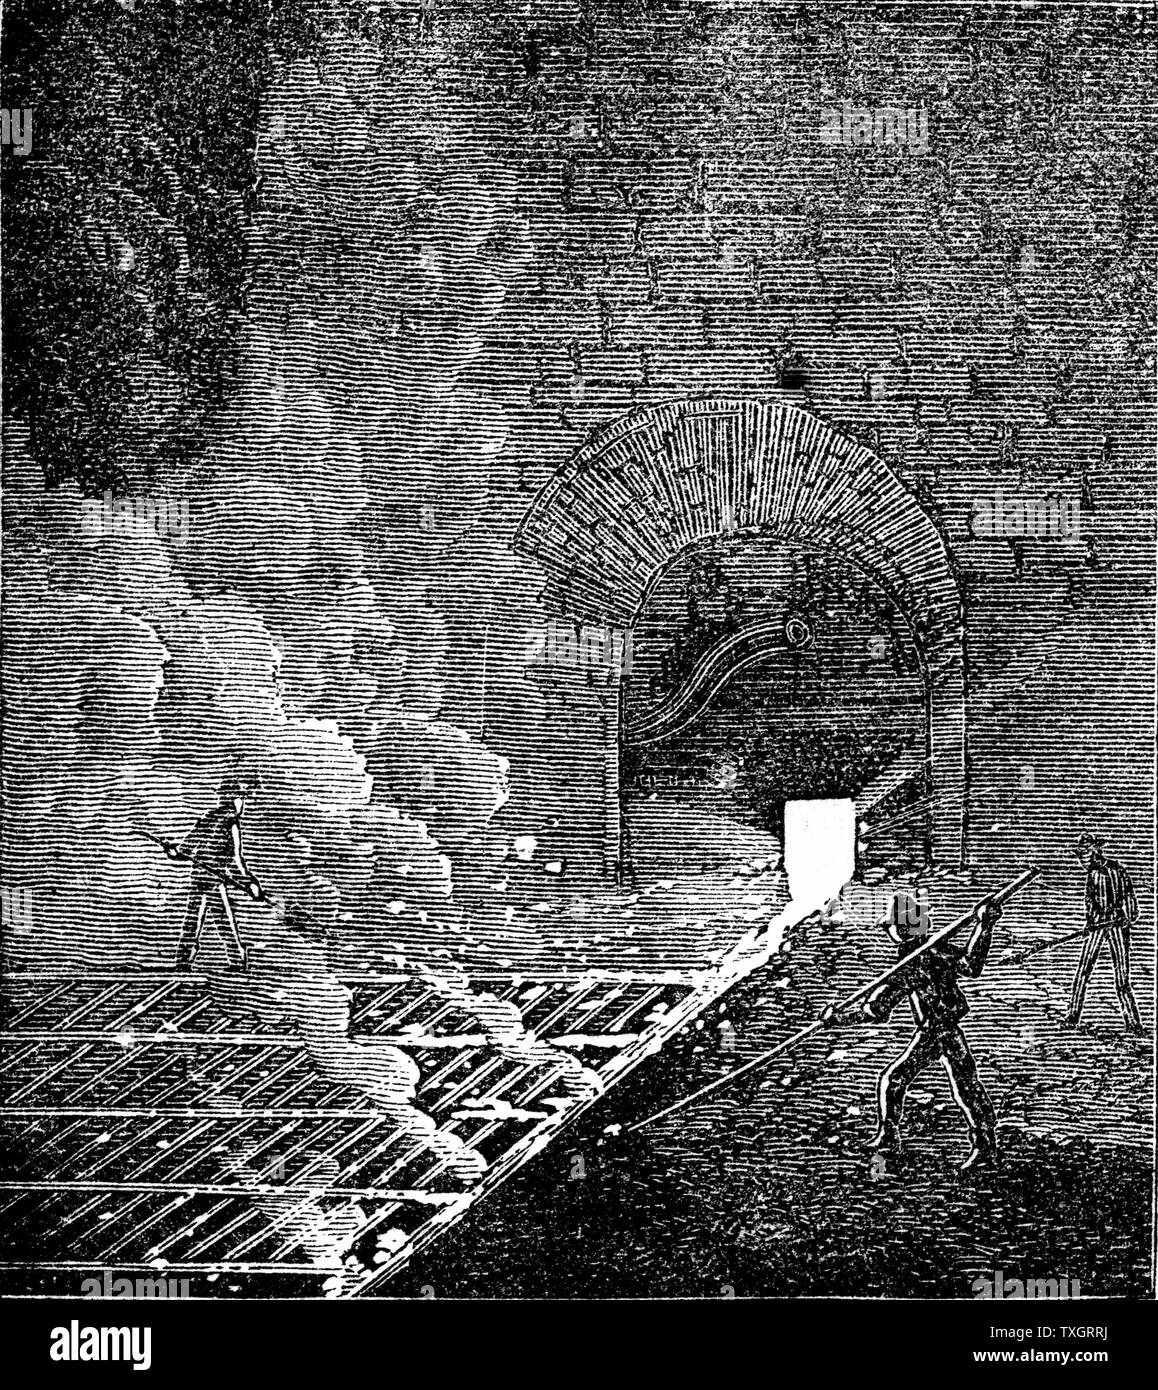 Pig Iron: tapping furnace and running molten iron into moulds to form pigs  Phoenix Iron and Bridge Works, Phoenixville, Pennsylvania.  1873 From'The Science Record' Engraving New York Stock Photo